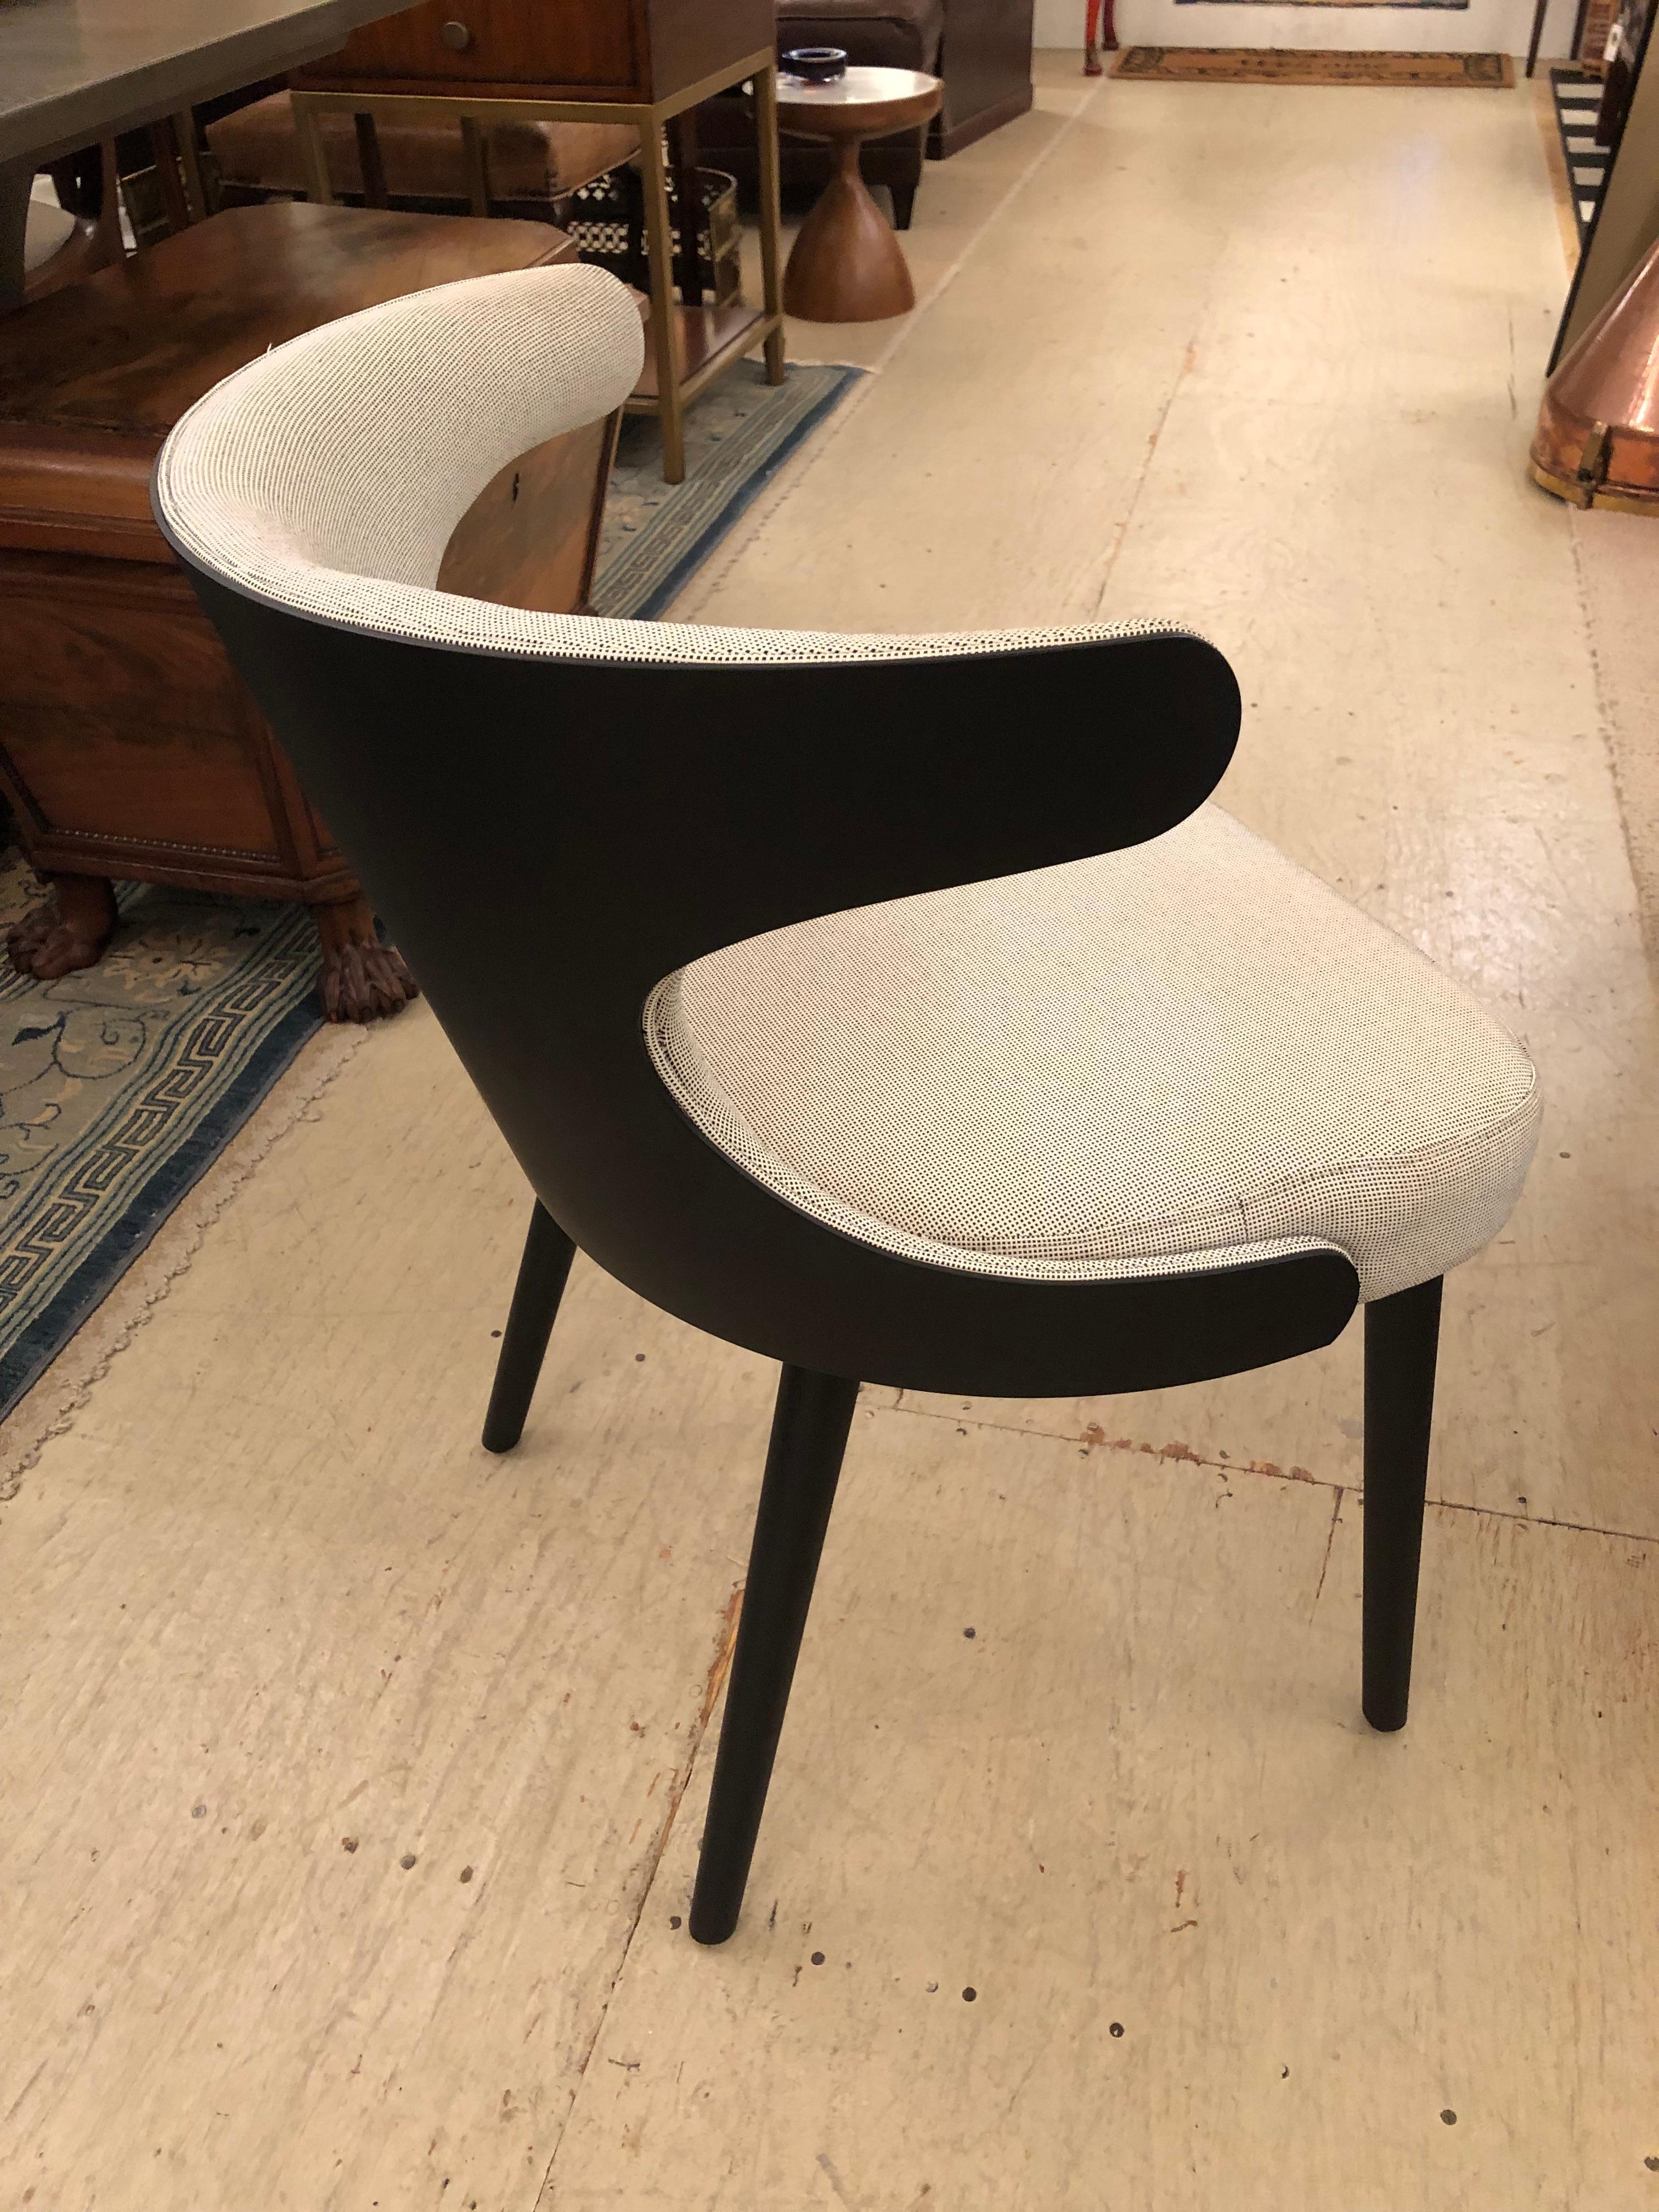 Upholstery Super Chic Sculptural Pair of Italian Chairs For Sale